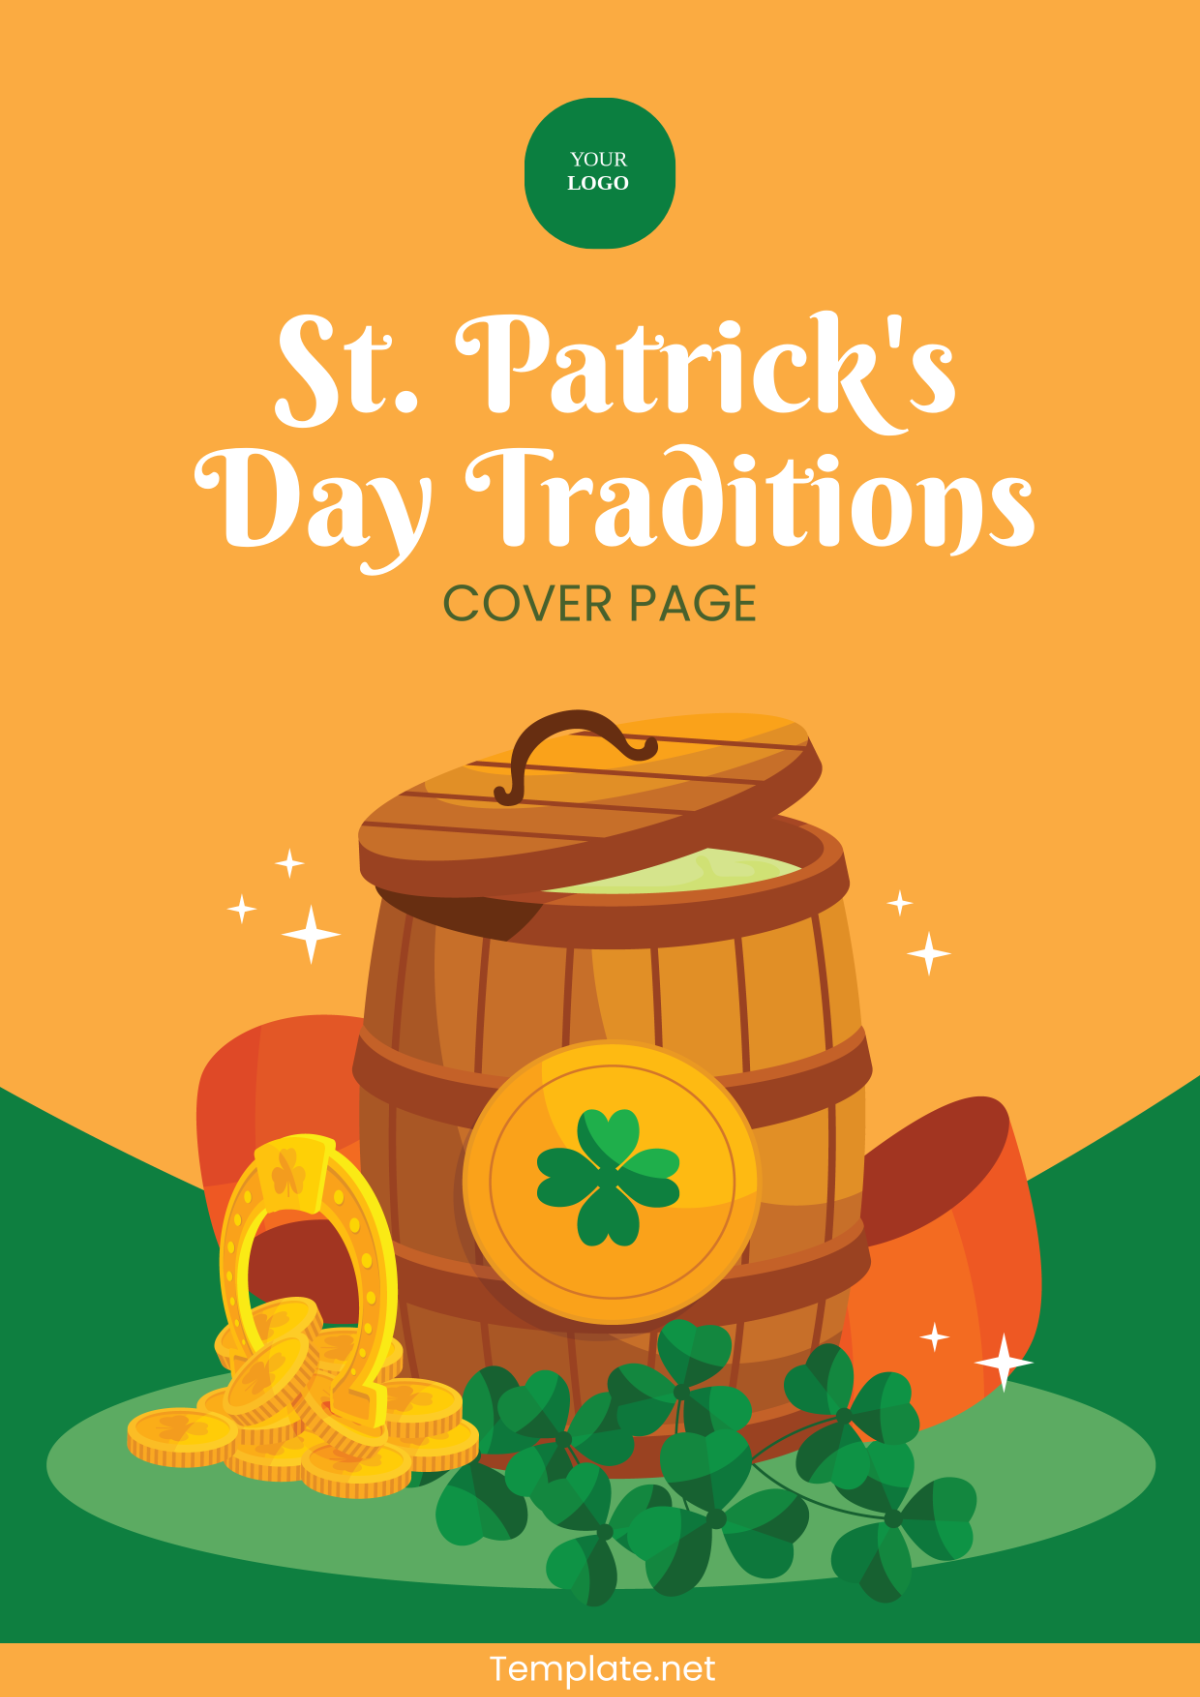 St. Patrick's Day Traditions Cover Page